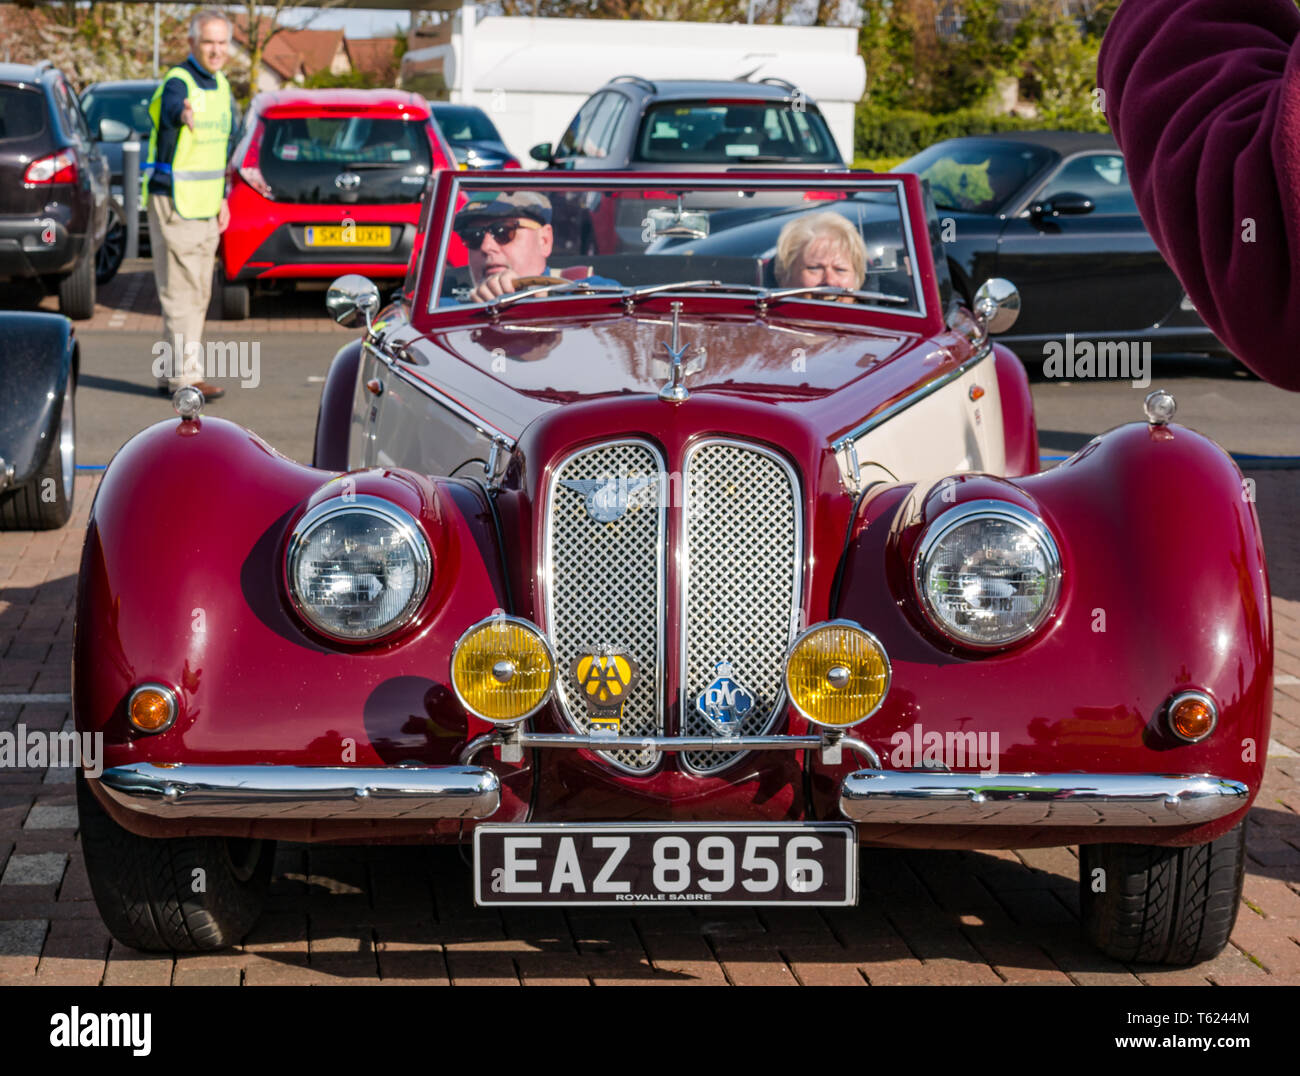 East Lothian, UK. 28 April 2019. Classic Car Tour: North Berwick Rotary Club holds its 3rd rally with 65 classic cars entered. The car rally route is from East Lothian and back through the Scottish Borders, raising money for local charities. The cars gather in North Berwick before setting off. A couple in a 1986 Royale Sabre Classic car Stock Photo